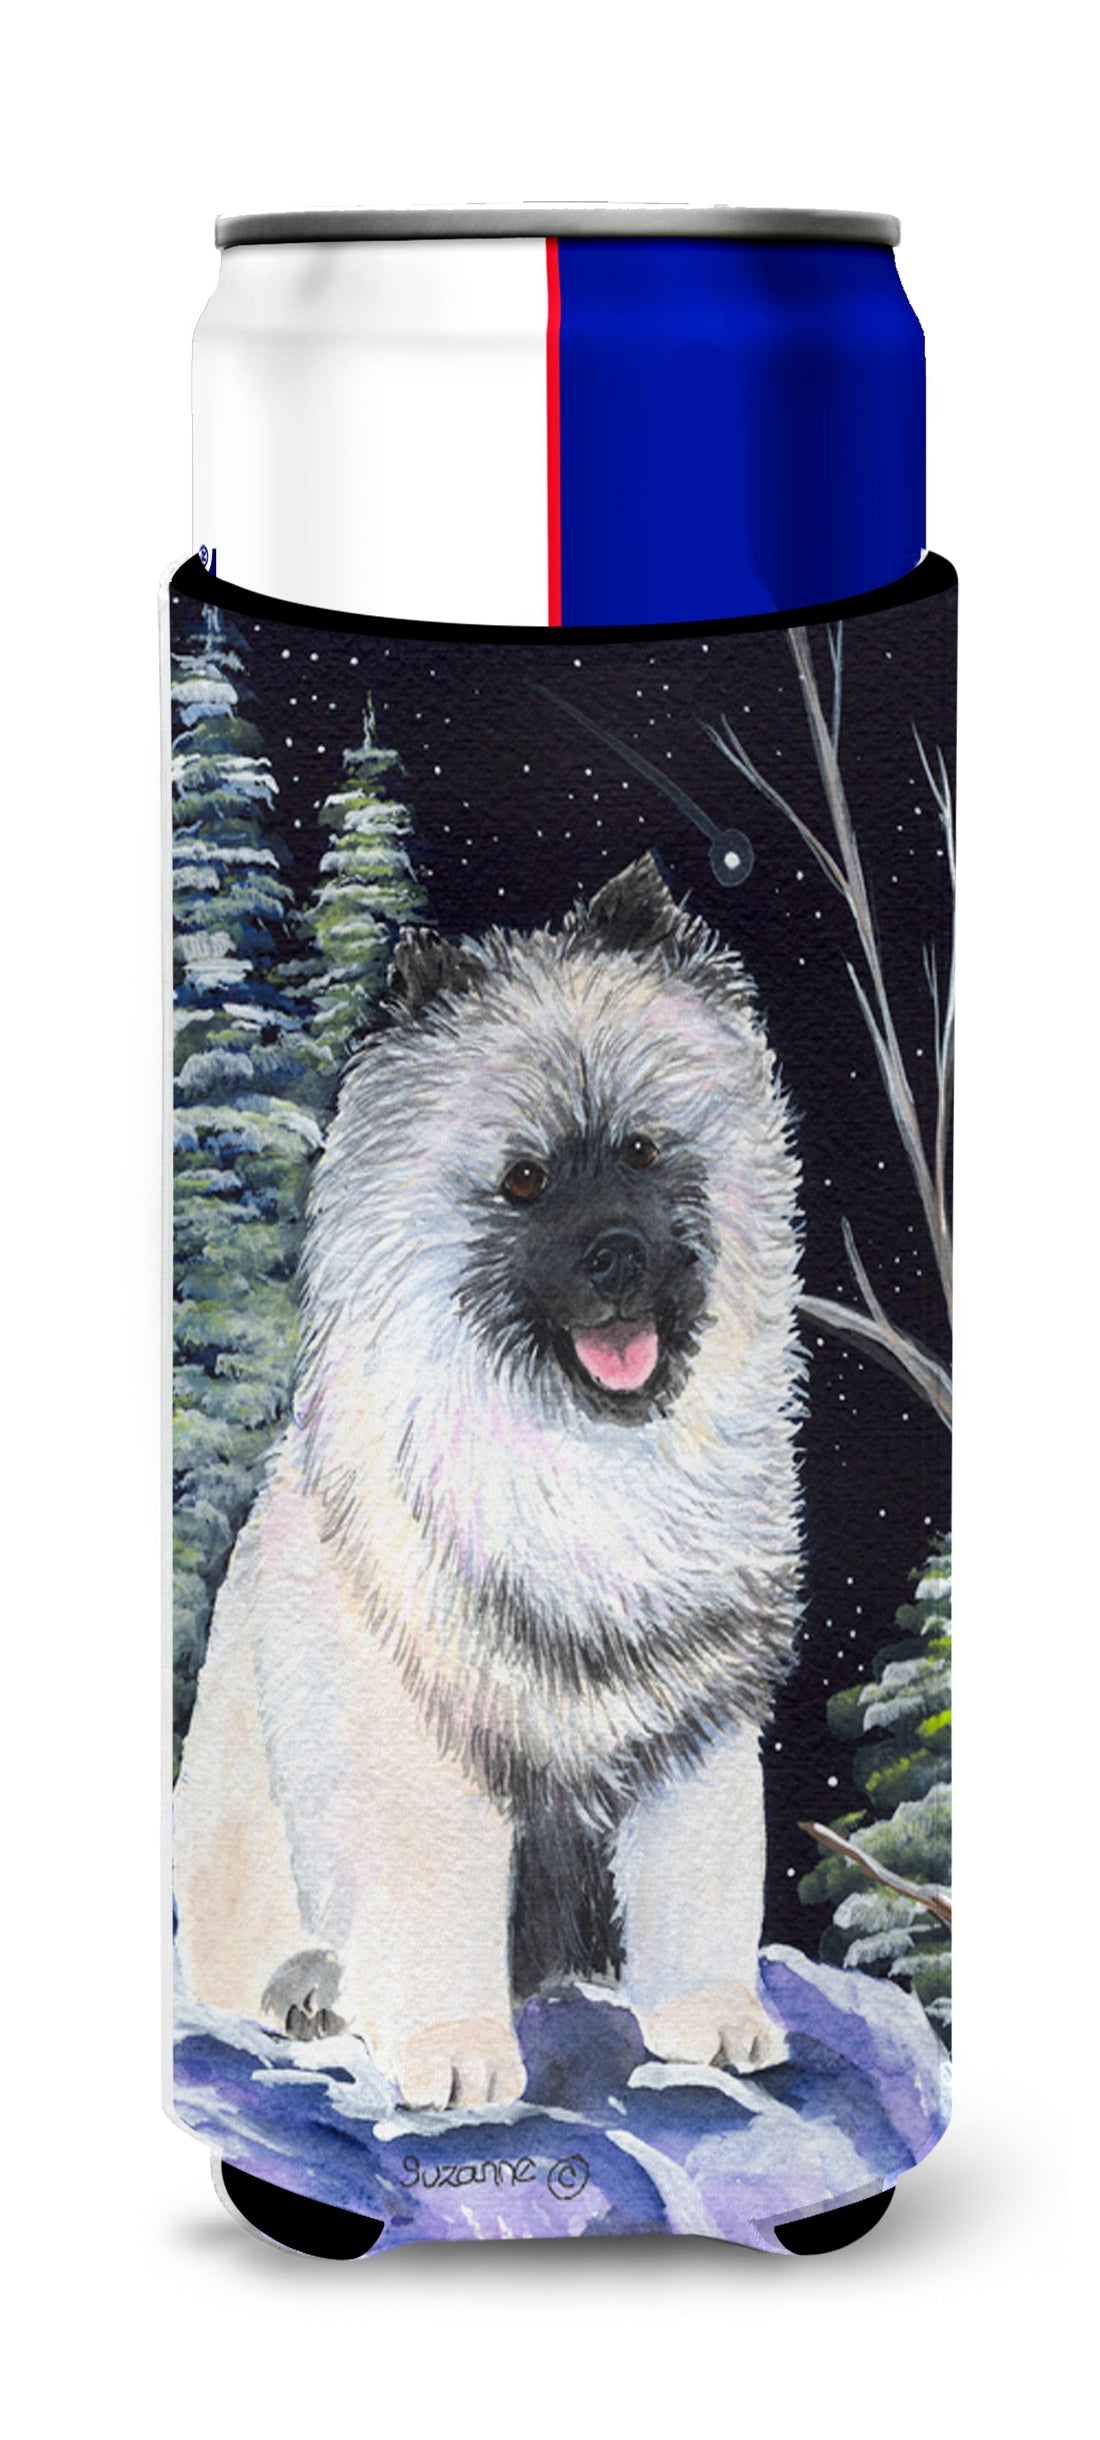 Starry Night Keeshond Ultra Beverage Insulators for slim cans SS8404MUK.